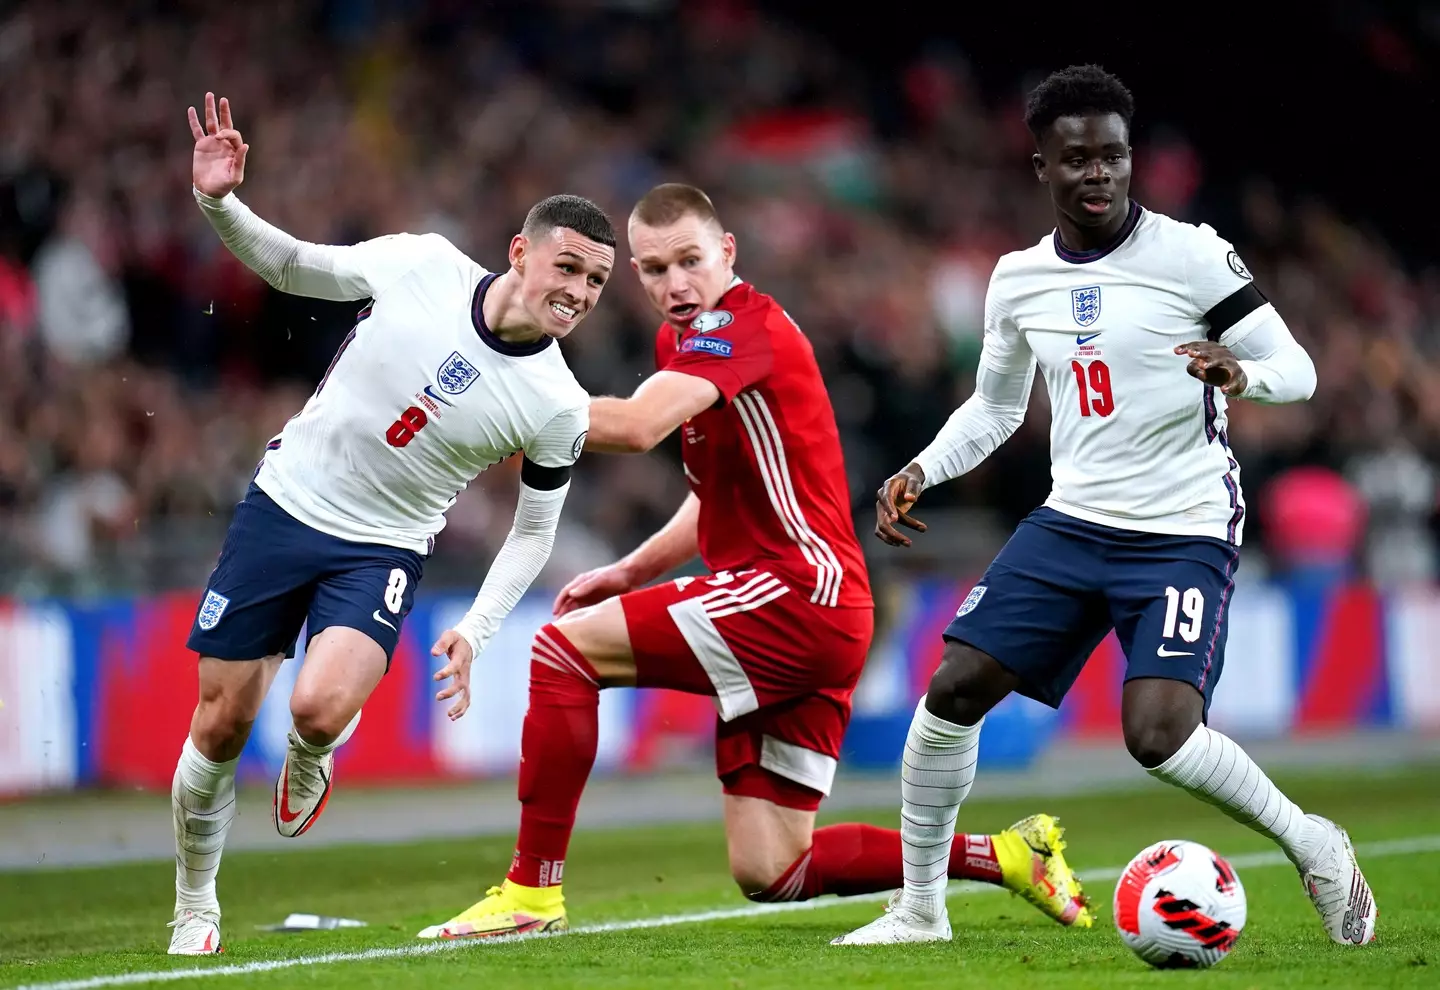 Foden and Saka are both set for a bright future with England (Image: Alamy)